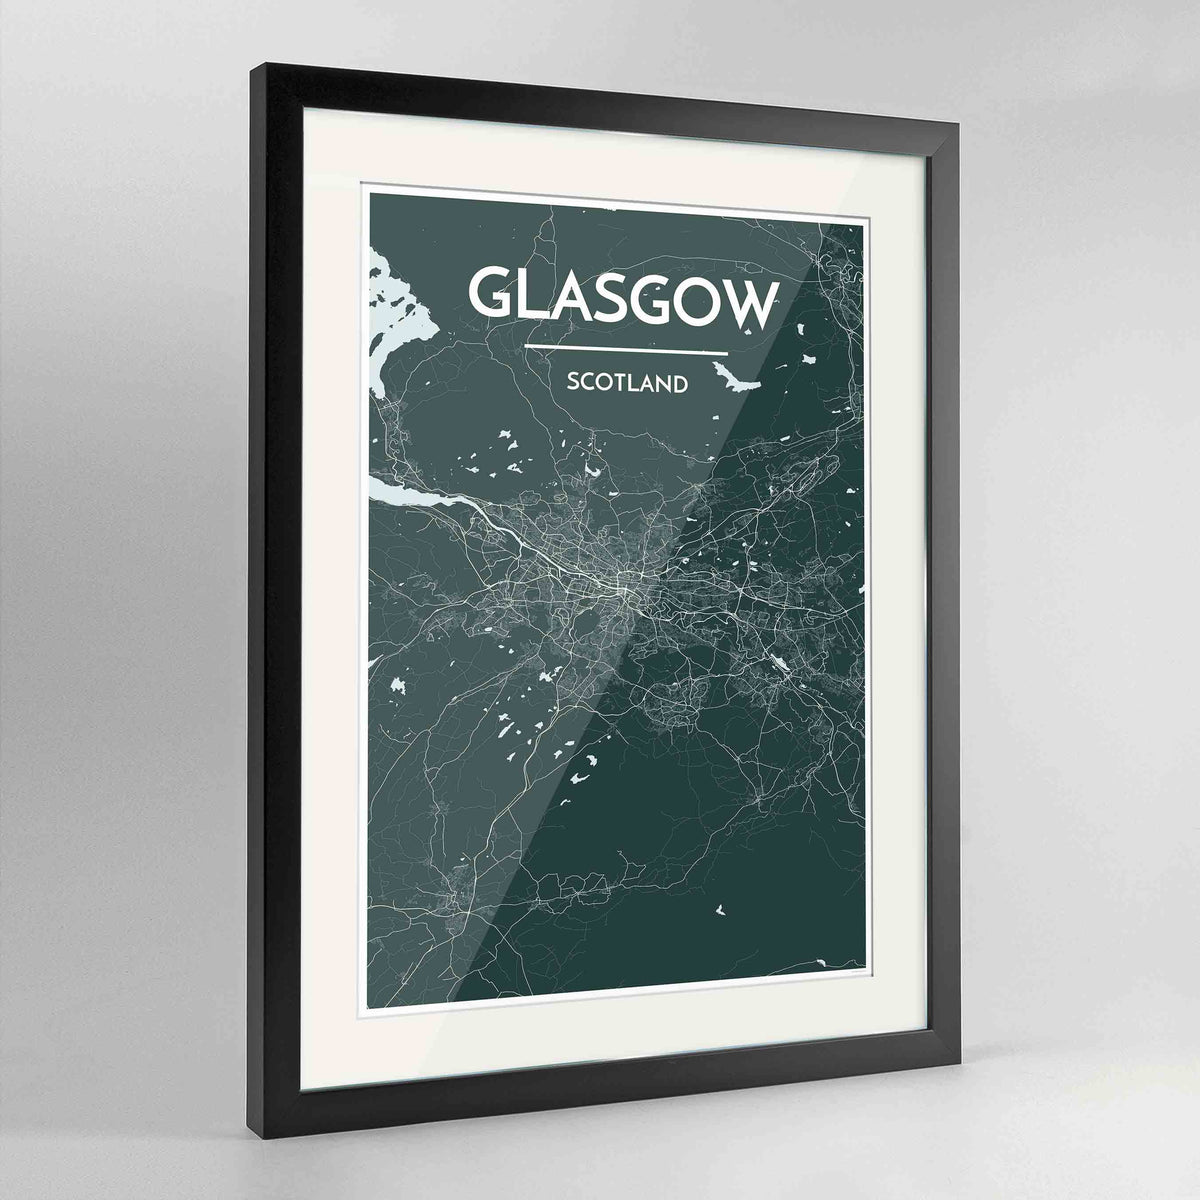 Framed Glasgow Map Art Print 24x36&quot; Contemporary Black frame Point Two Design Group